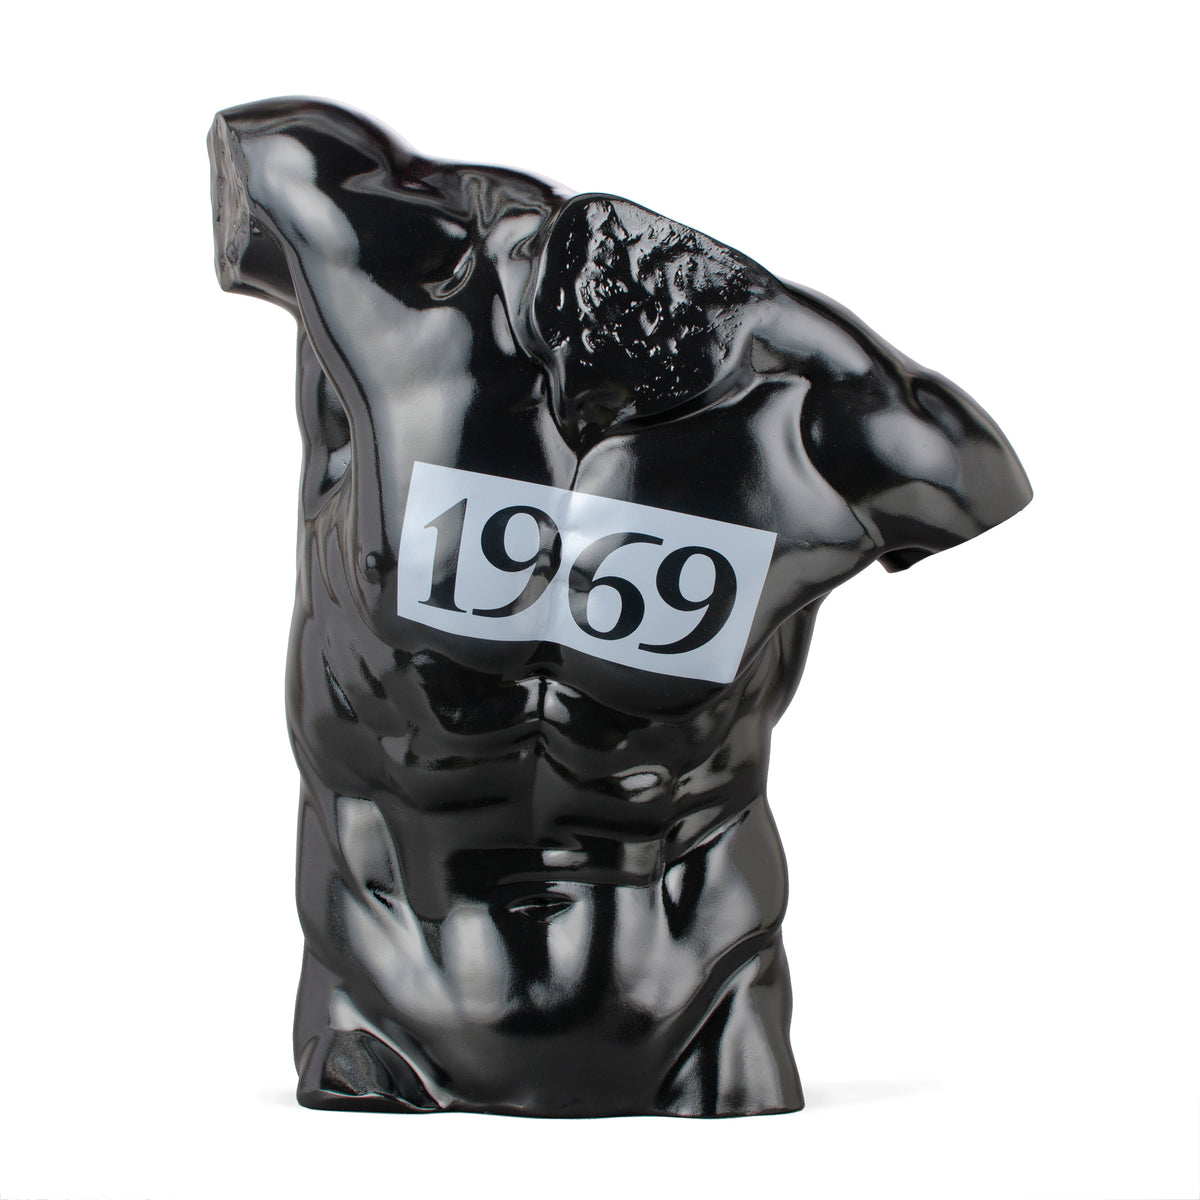 Beautiful handcrafted sculpture of a large high gloss torso in patent leather black with the year 1969 emblazoned across the chest.